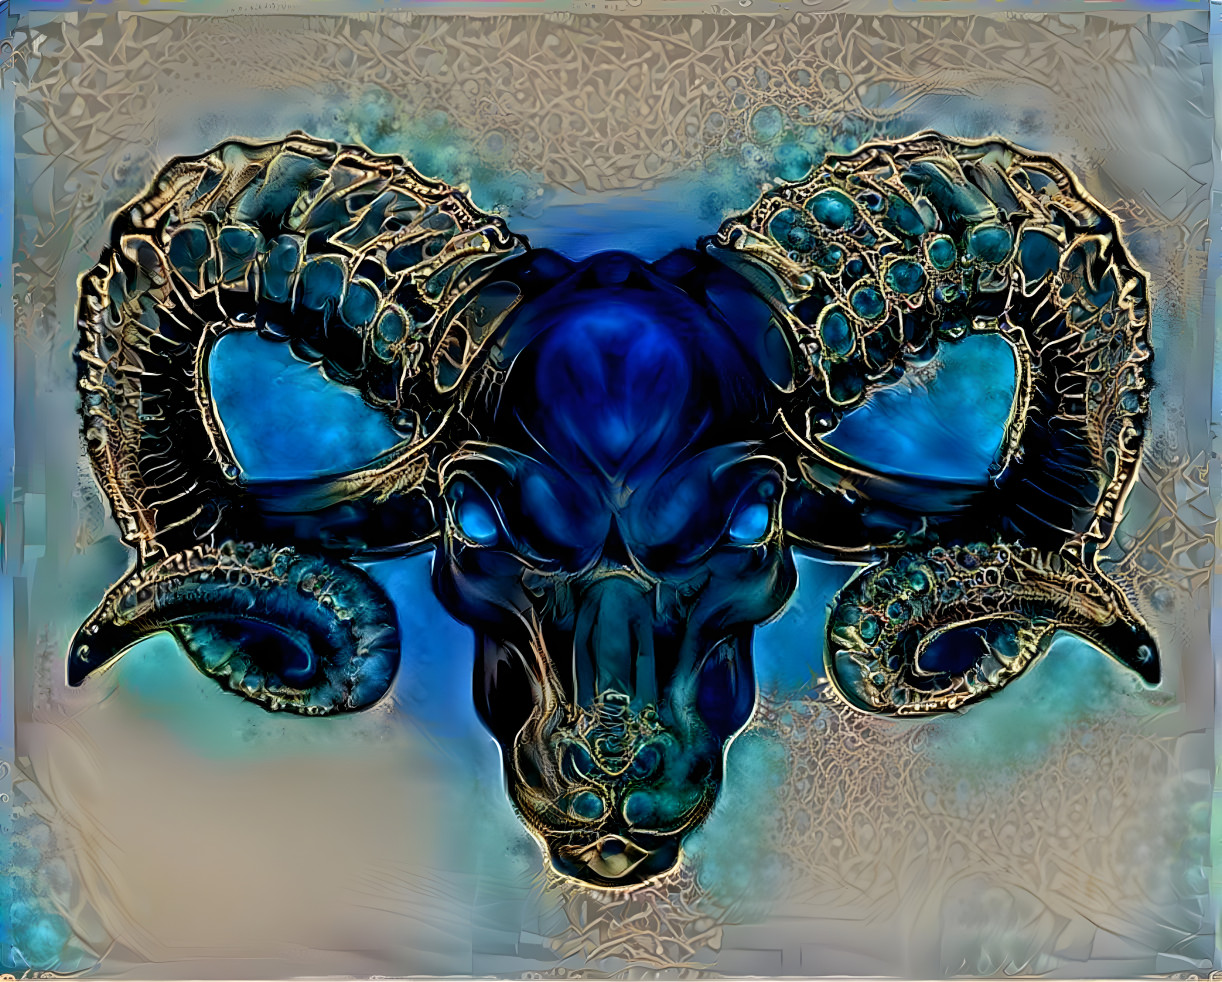 by the horns